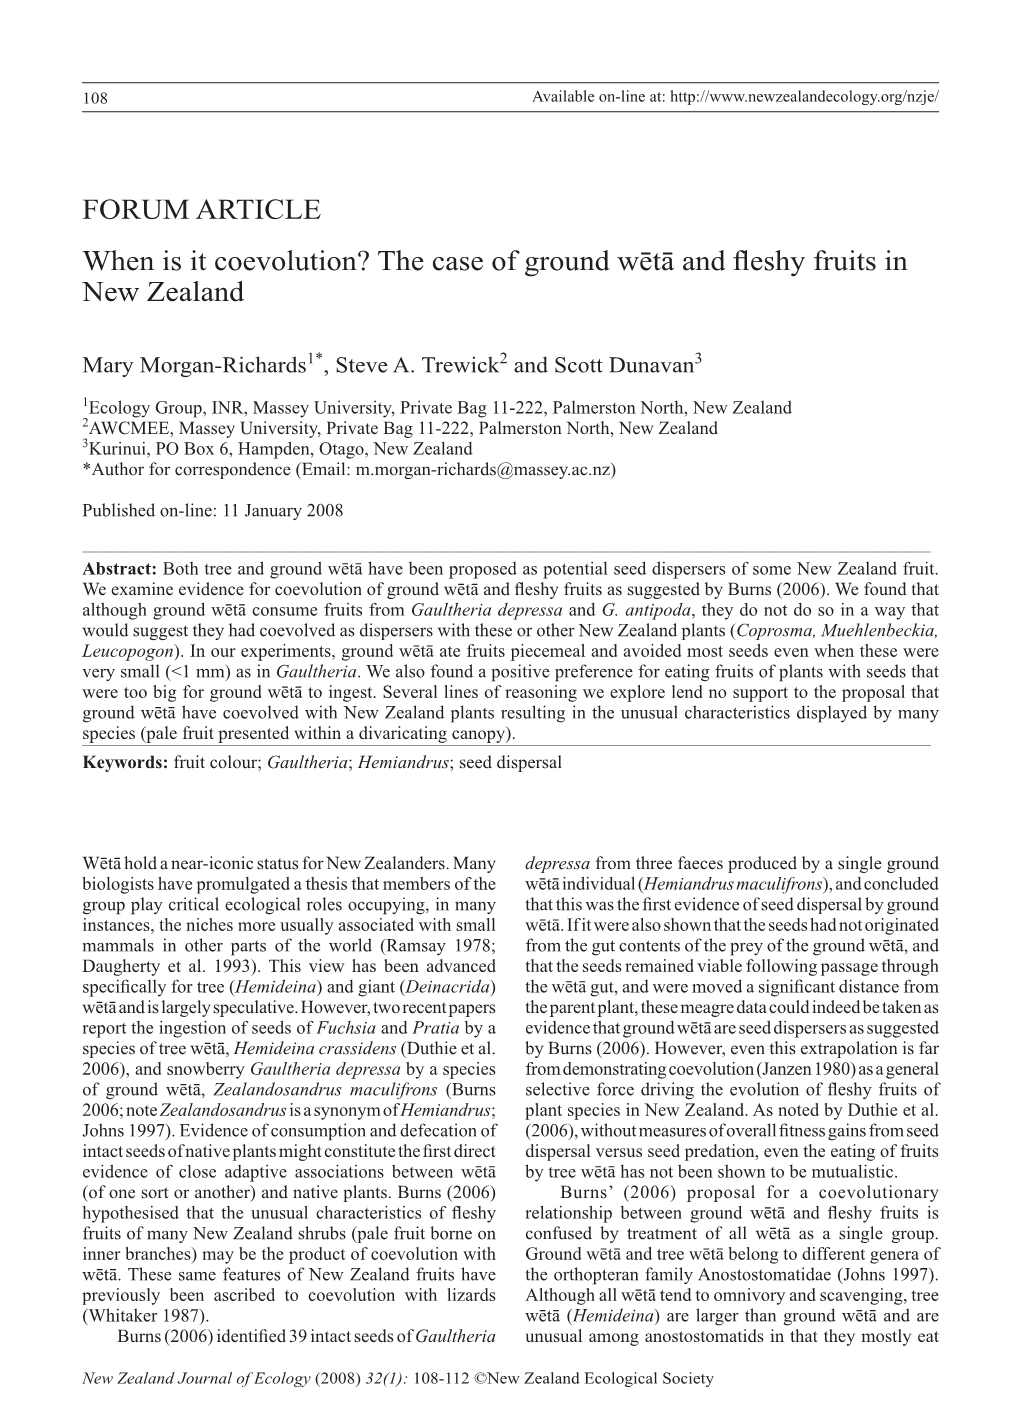 The Case of Ground Wētā and Fleshy Fruits in New Zealand